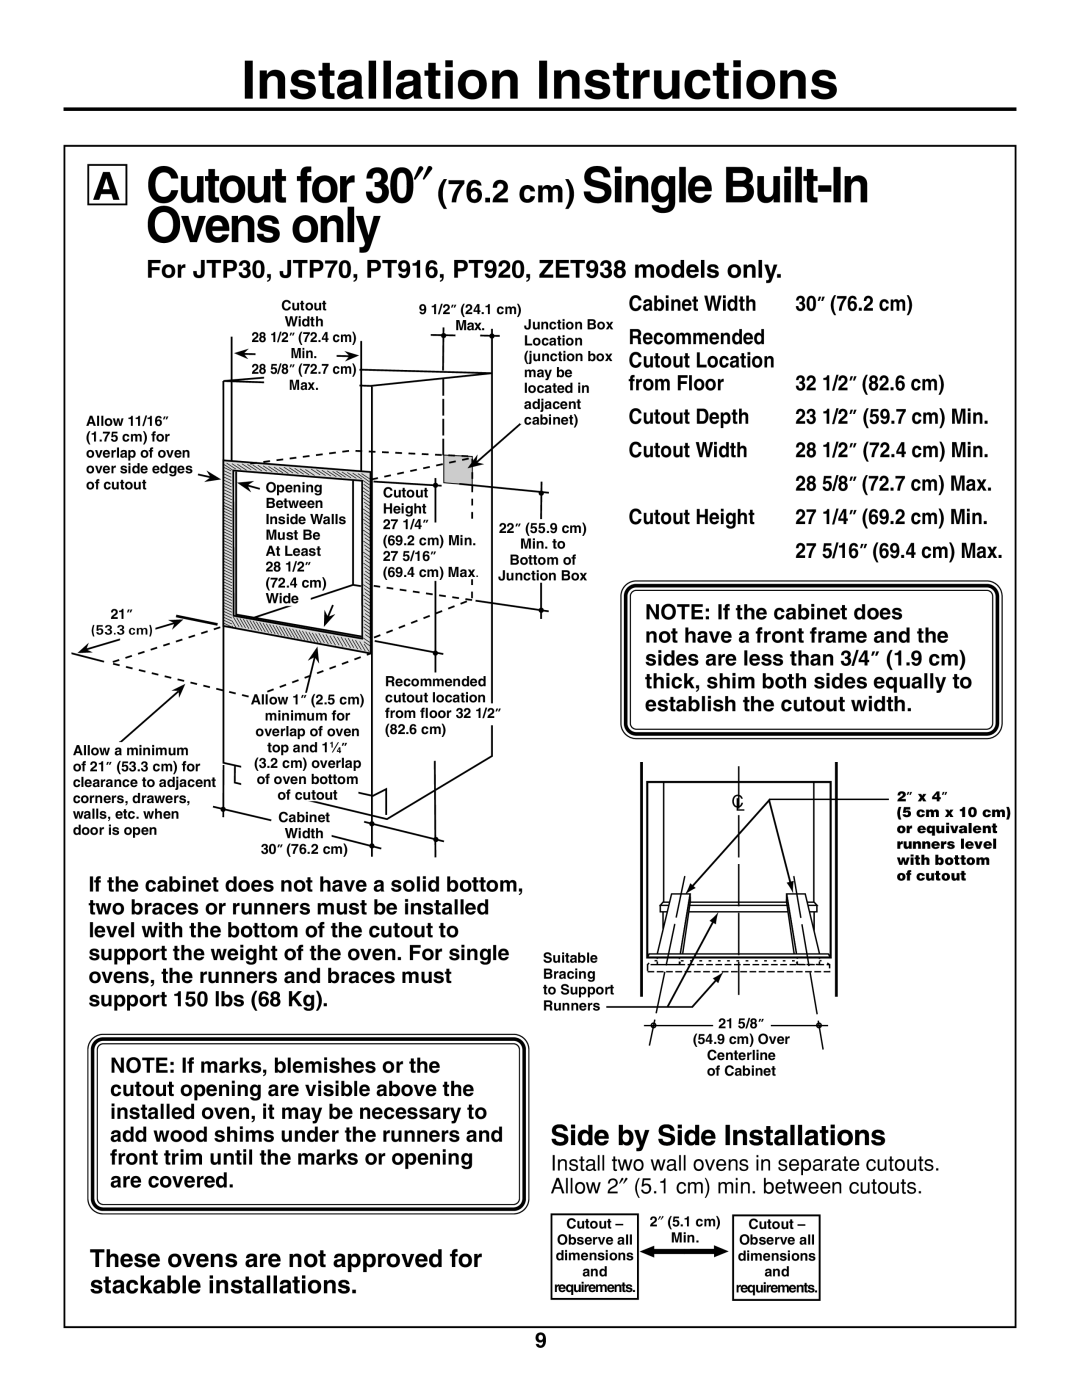 GE r08654v-1 Cutout for 30″ 76.2 cm Single Built-In Ovens only, Side by Side Installations, Installation Instructions 